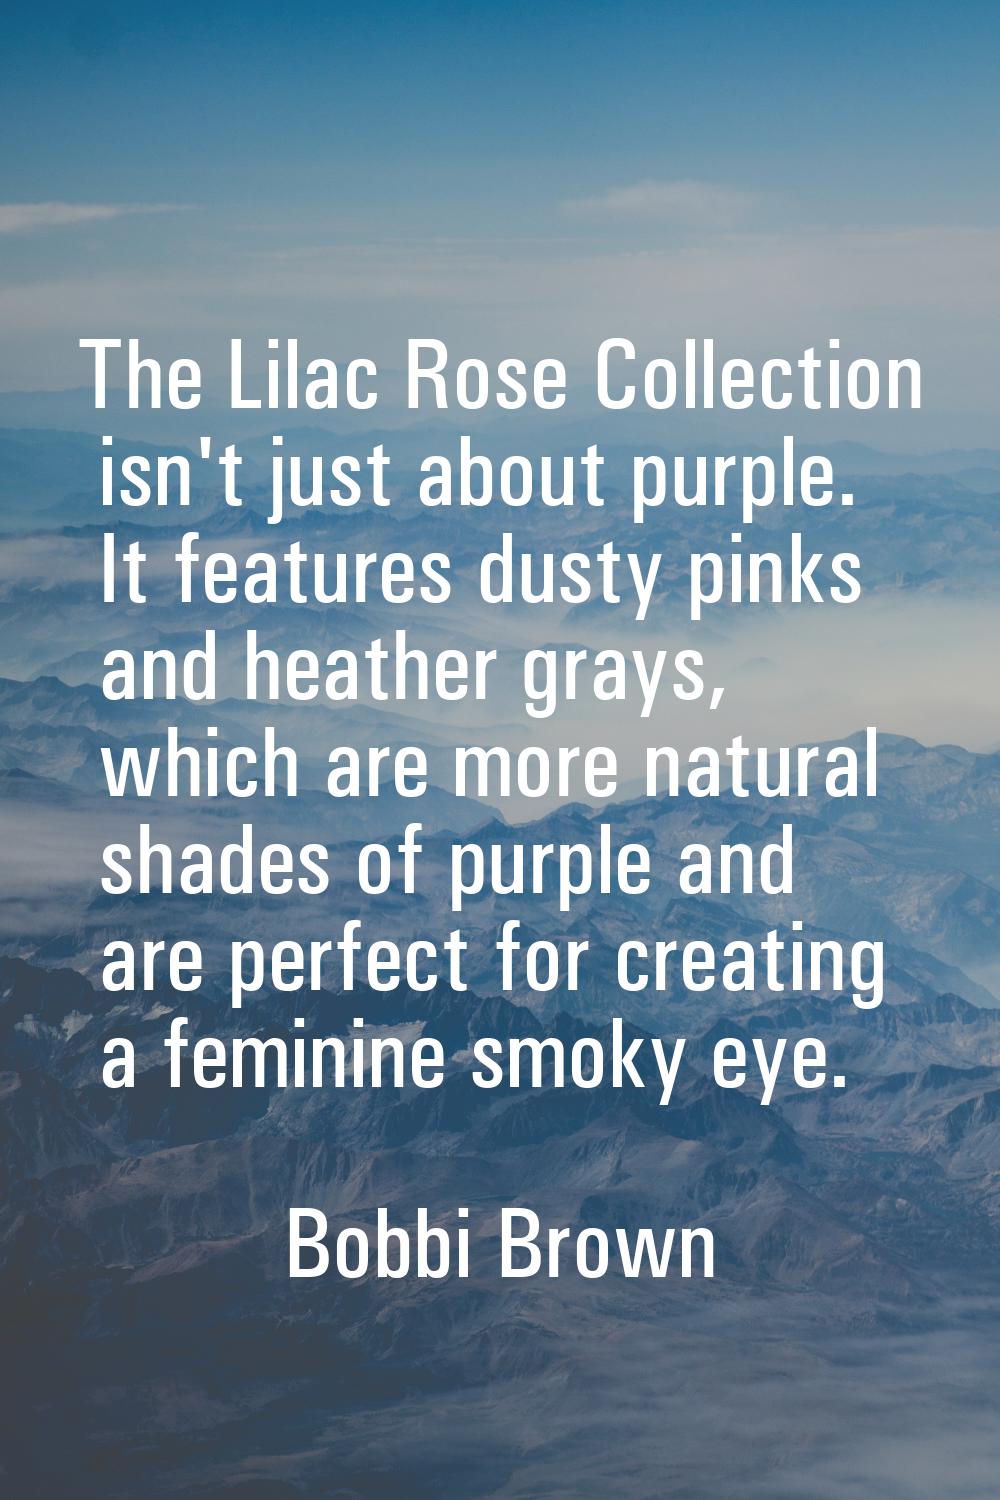 The Lilac Rose Collection isn't just about purple. It features dusty pinks and heather grays, which